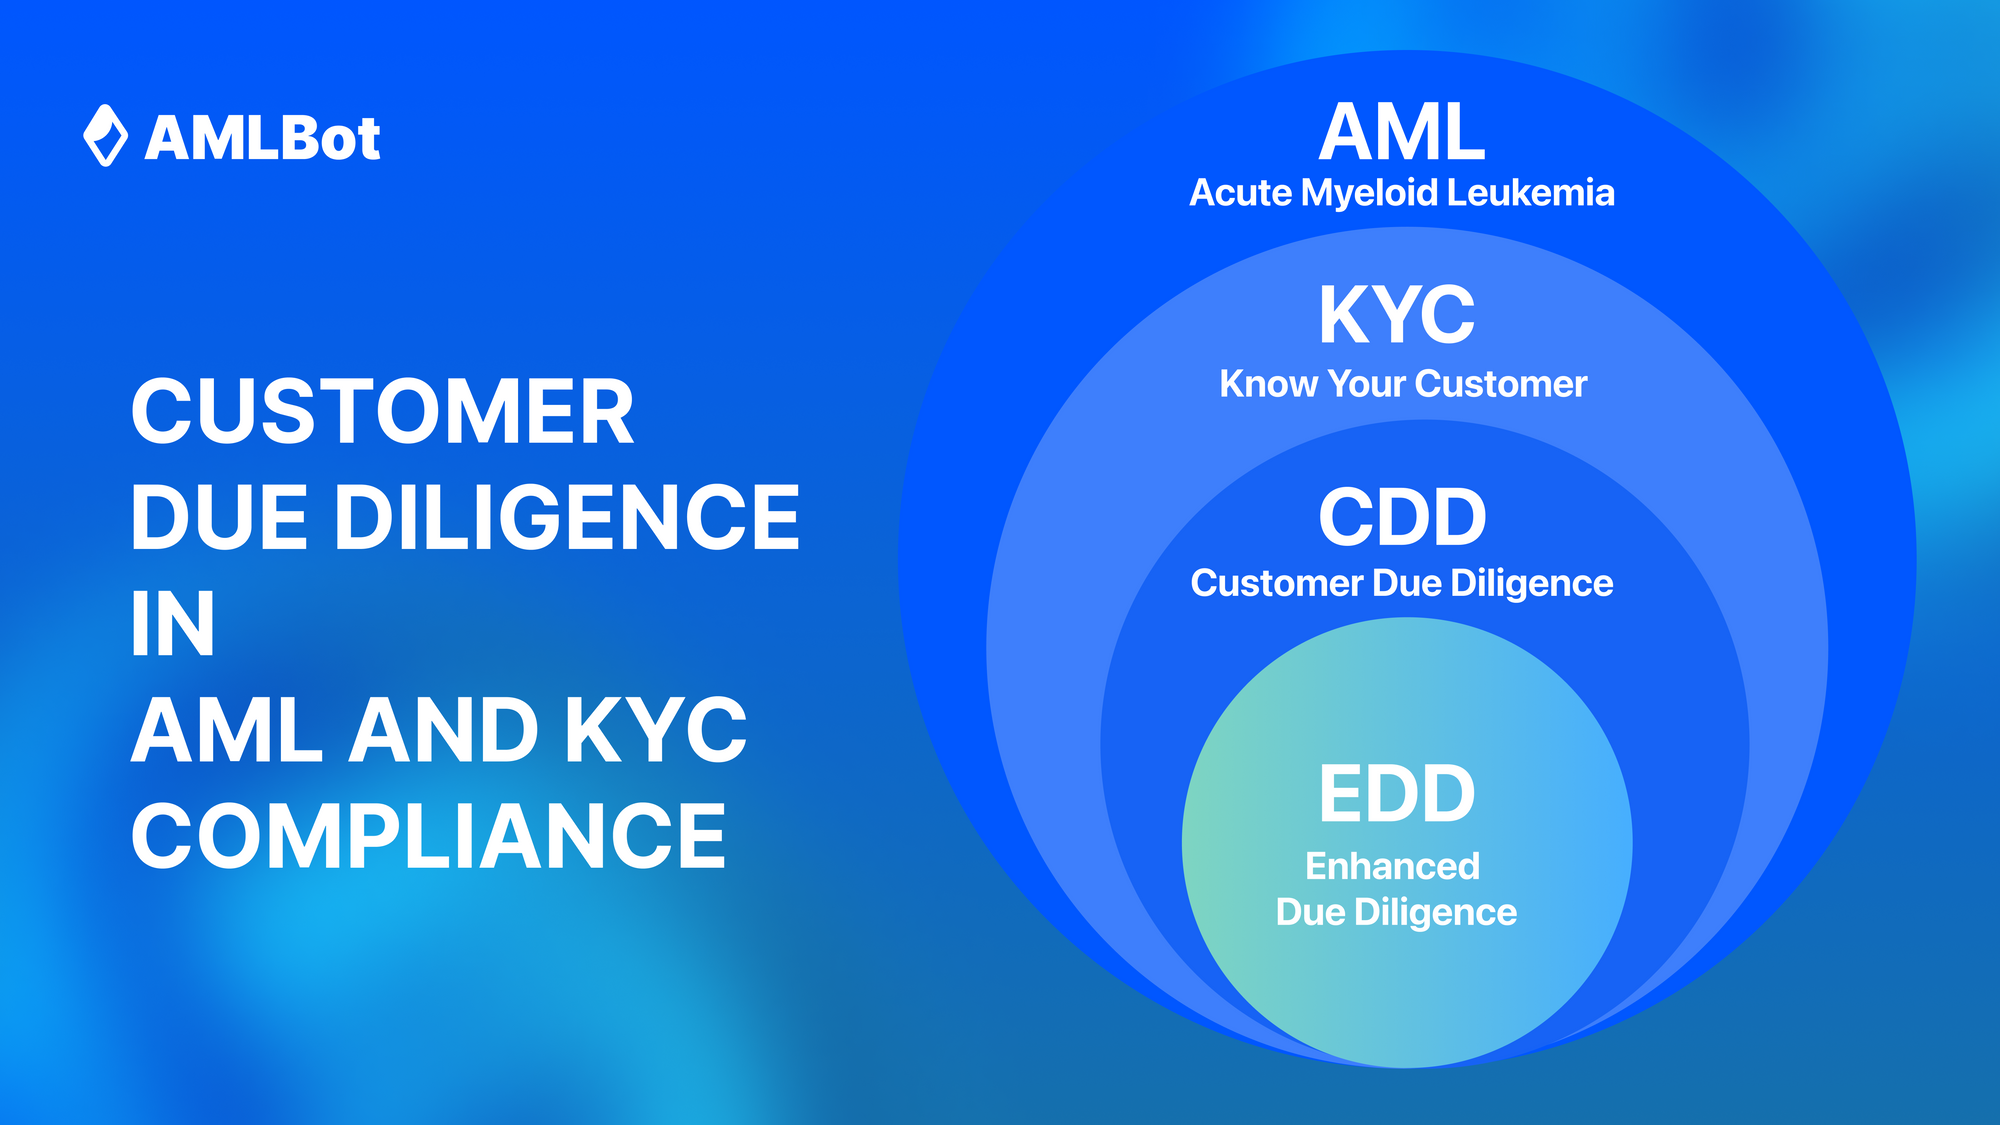 Customer Due Diligence in AML and KYC Compliance